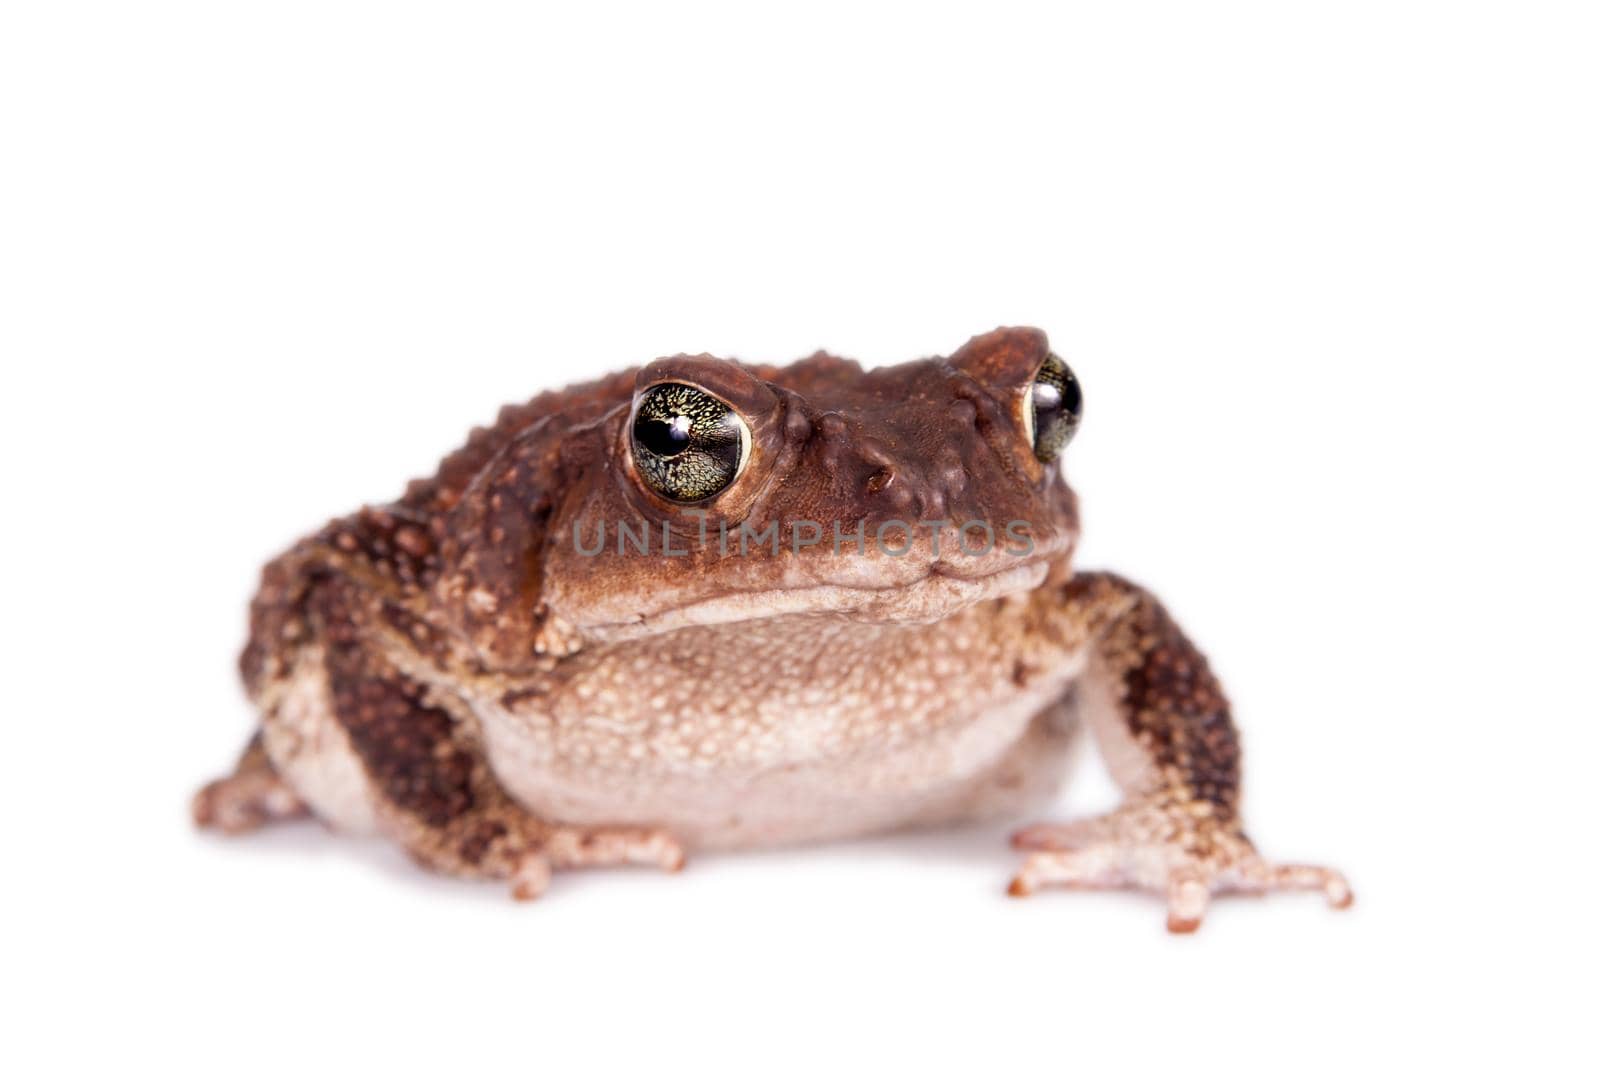 The Bufo peltocephalus isolated on white by RosaJay